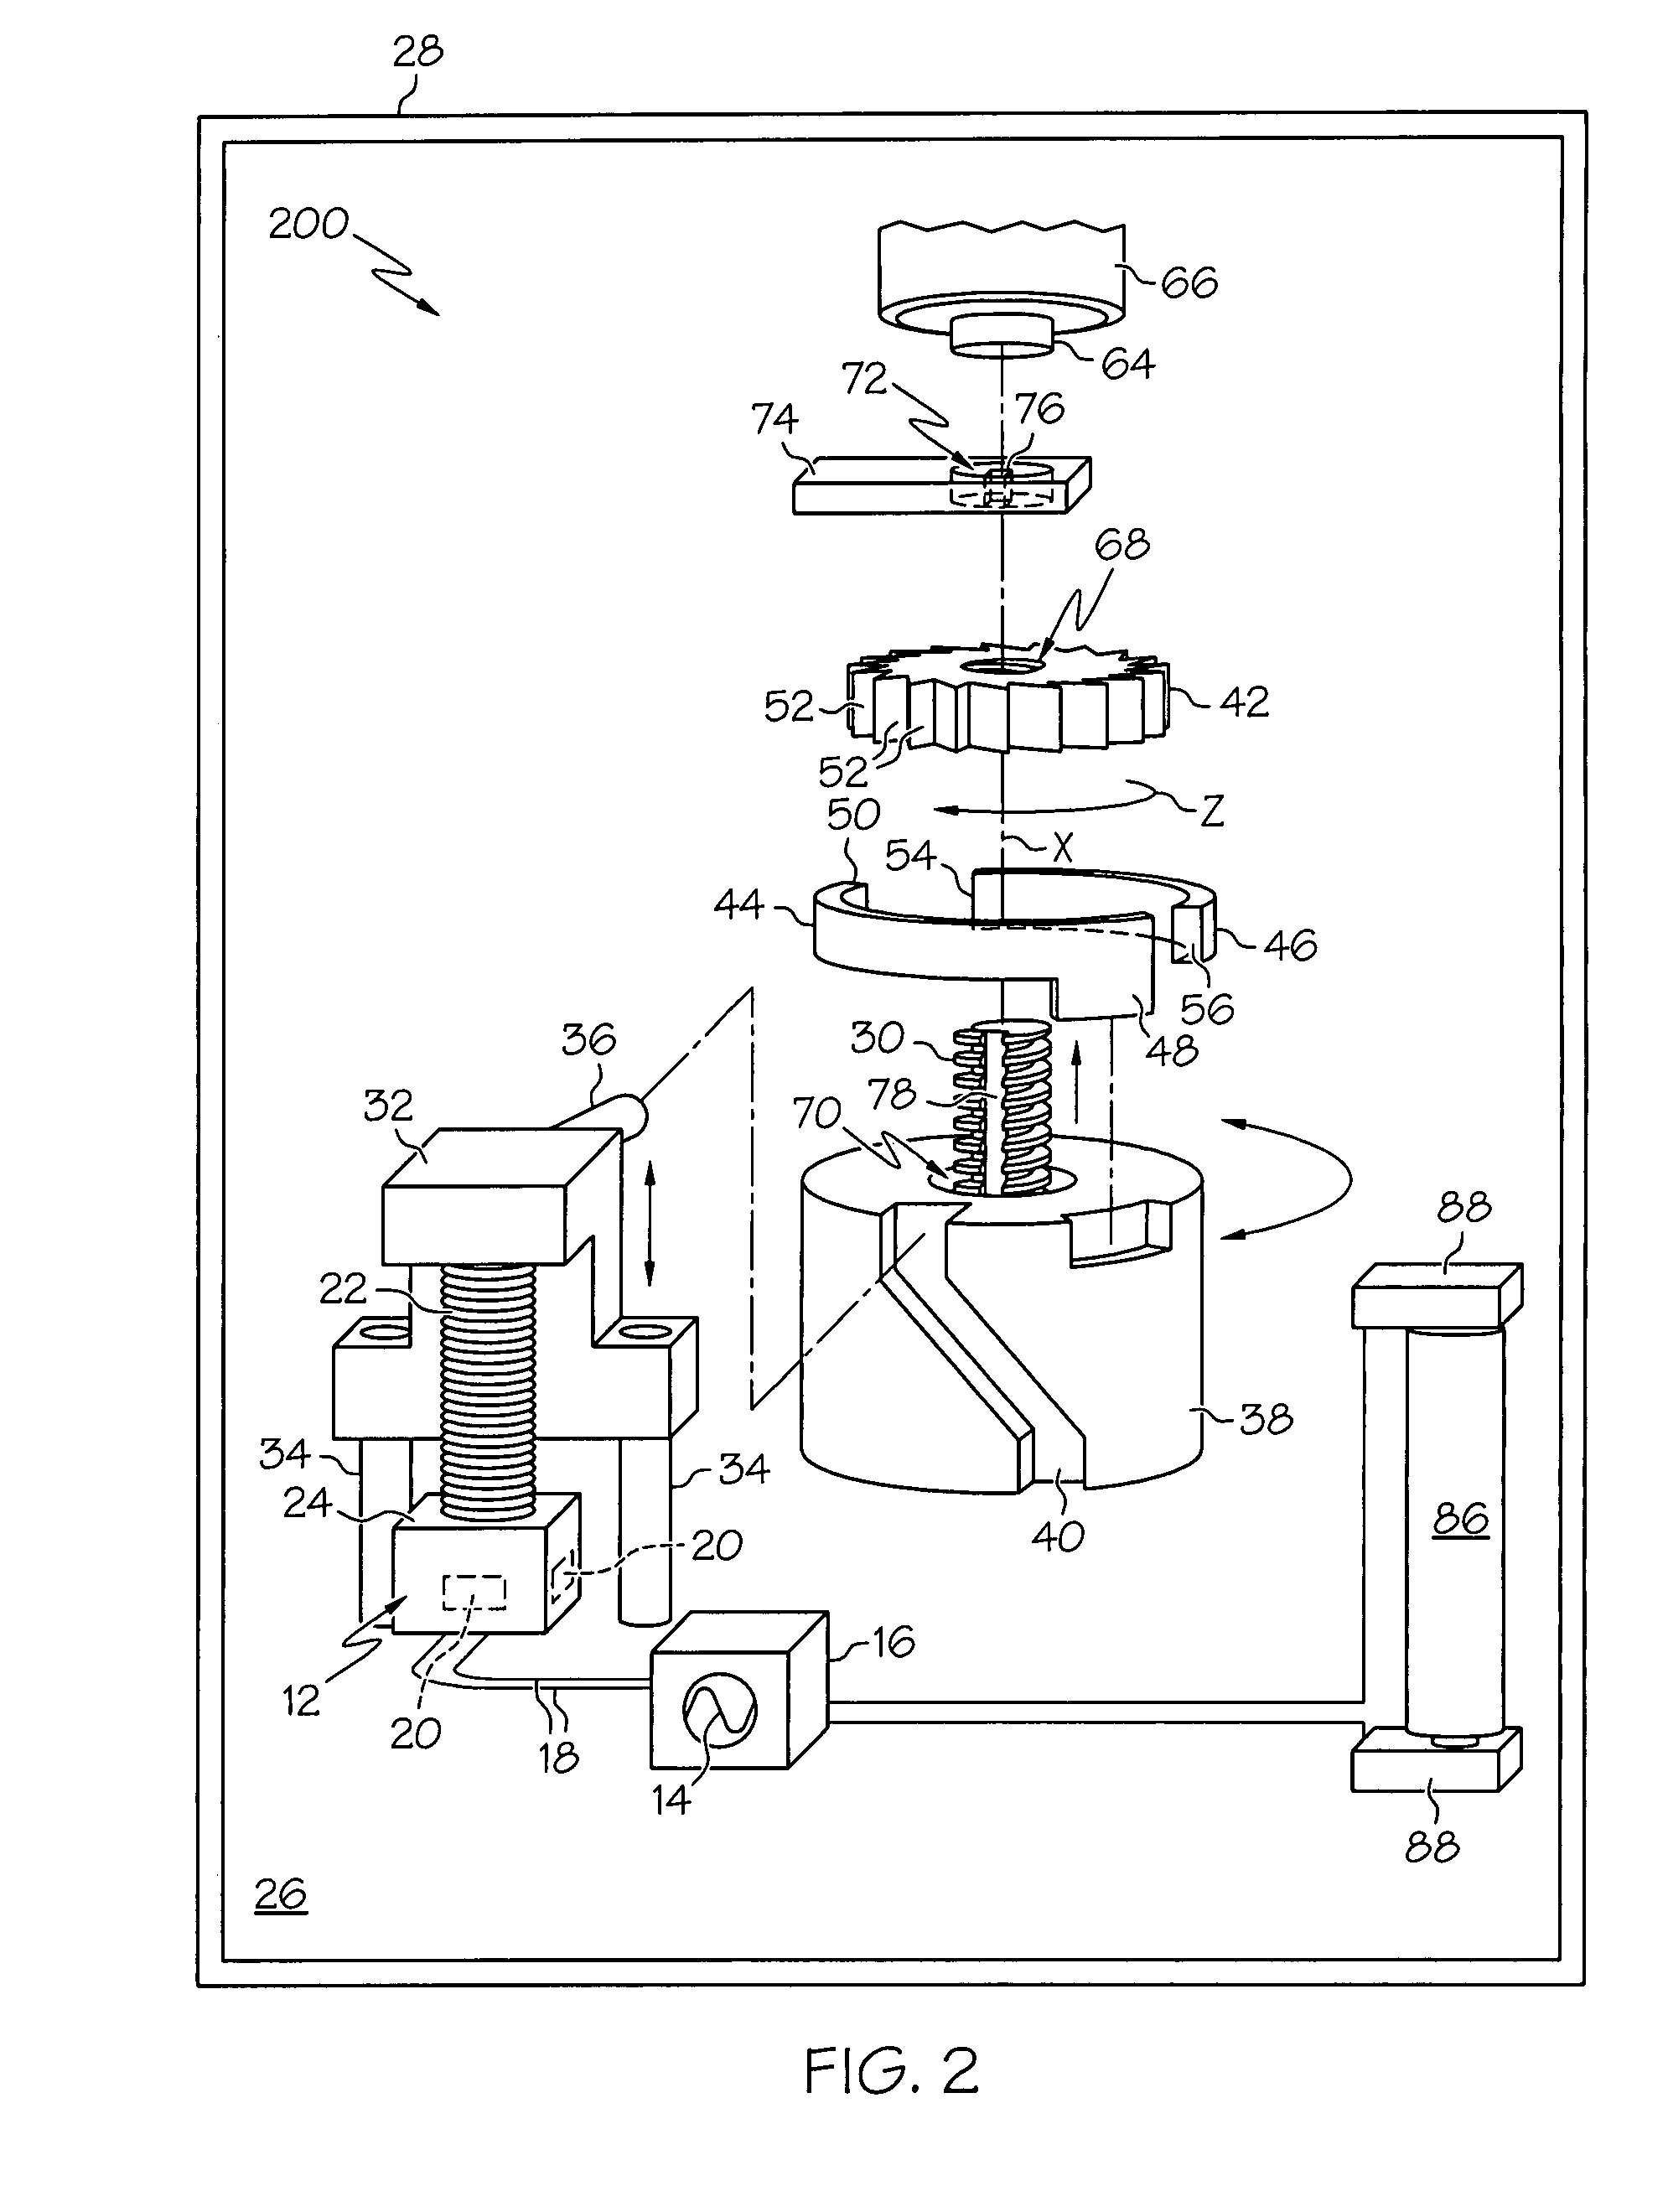 Drug delivery pump drive using linear piezoelectric motor